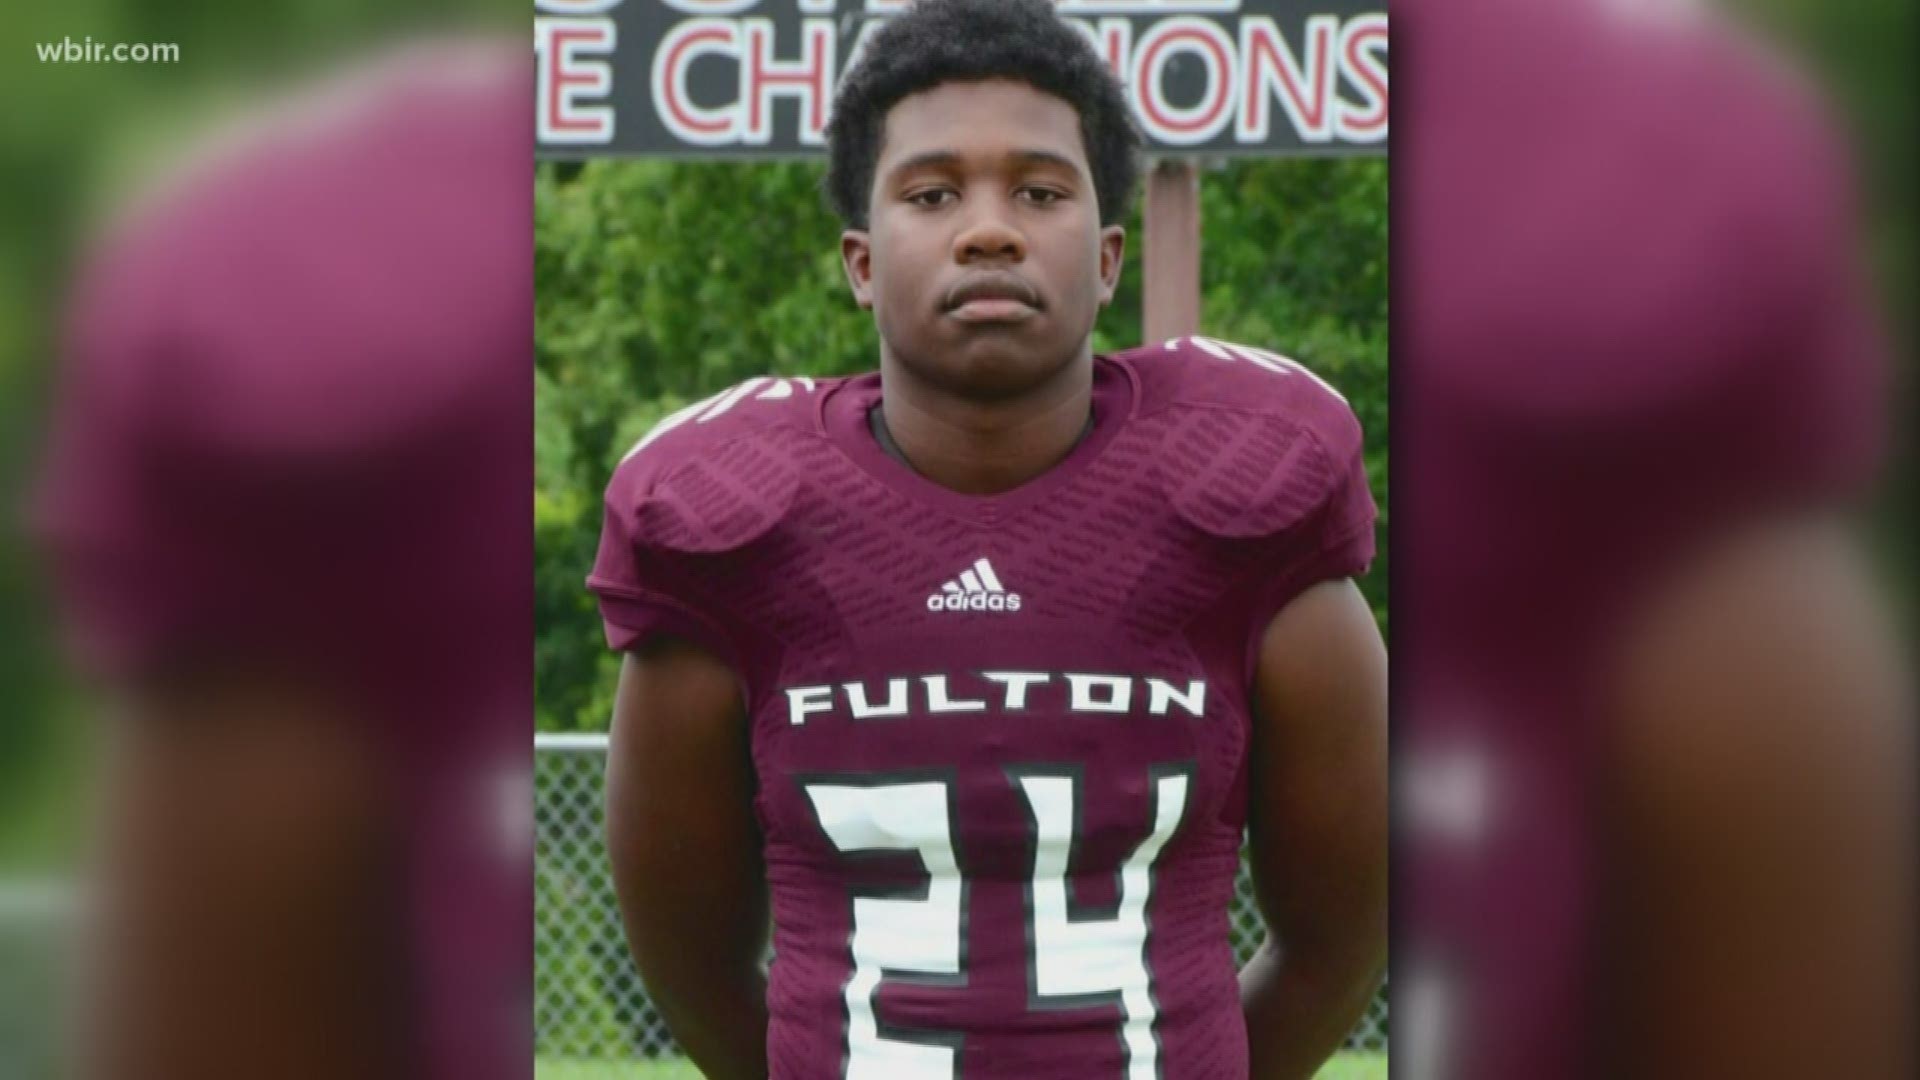 The community is honoring Zaevion Dobson this Saturday at 2 p.m. with several 7 on 7 pickup games at the Emerald Youth Foundation's Lonsdale Complex.